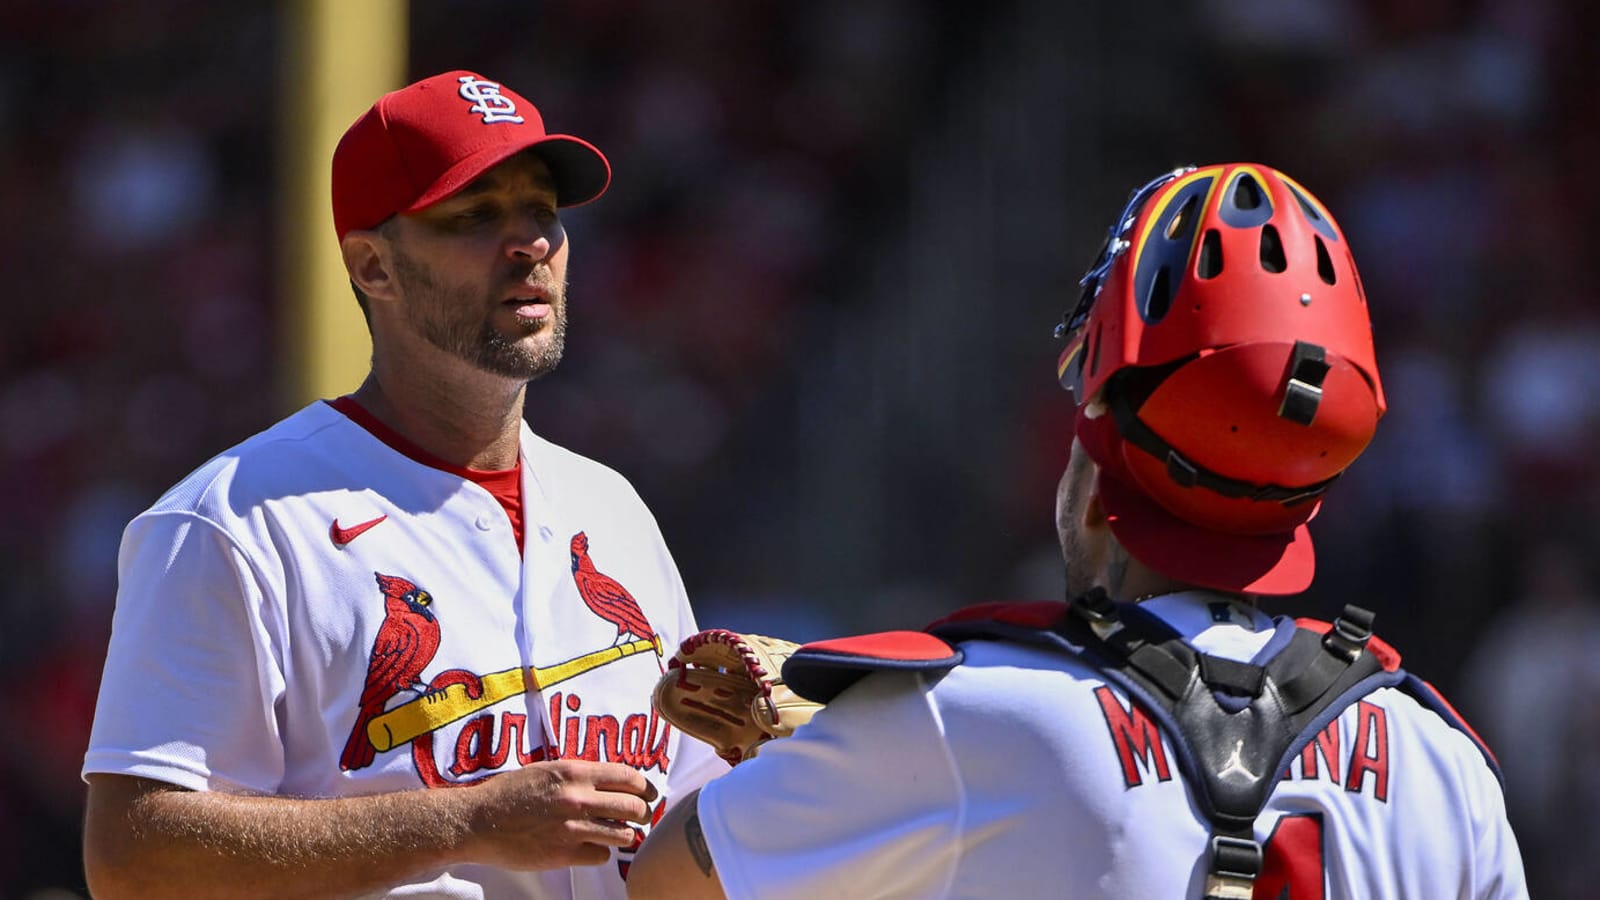 Molina to wear special helmet commemorating record-breaking start with Wainwright